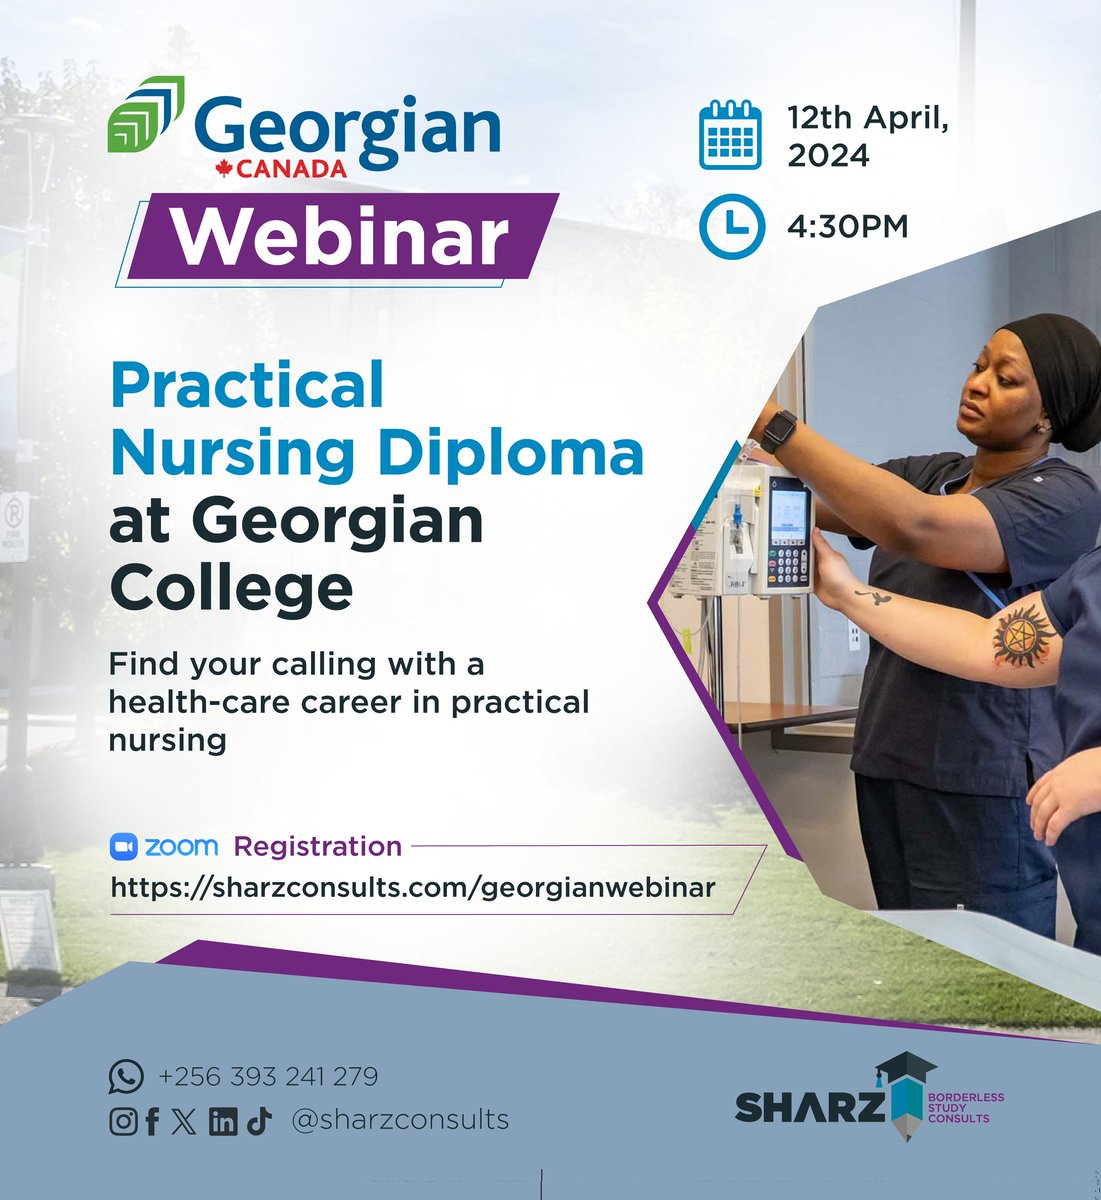 Unlock your path to a fulfilling healthcare career with @georgiancollege's Practical Nursing Diploma Program! Dive into hands-on clinical experience at state-of-the-art facilities. Register for the webinar and discover more: sharzconsults.com/georgianwebinar #StudyAbroadWithSharz